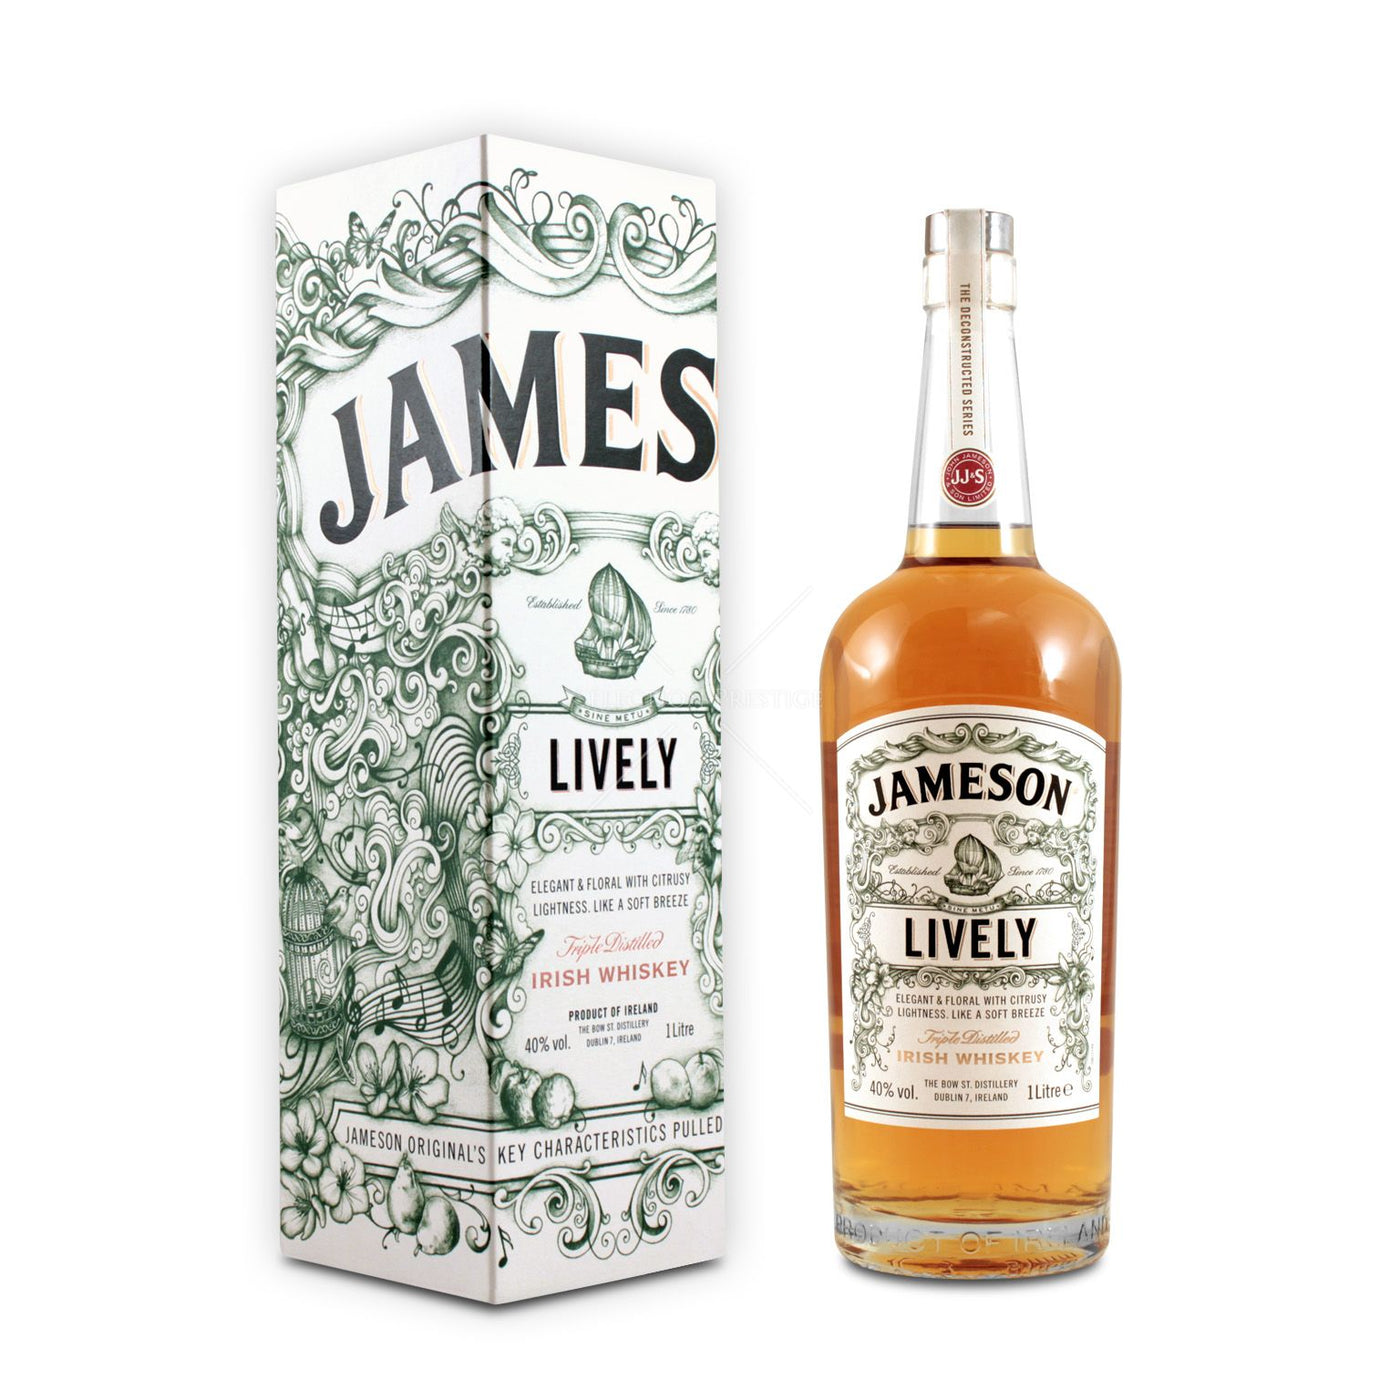 BUY] Jameson Deconstructed Series - Lively Blended Irish Whiskey at